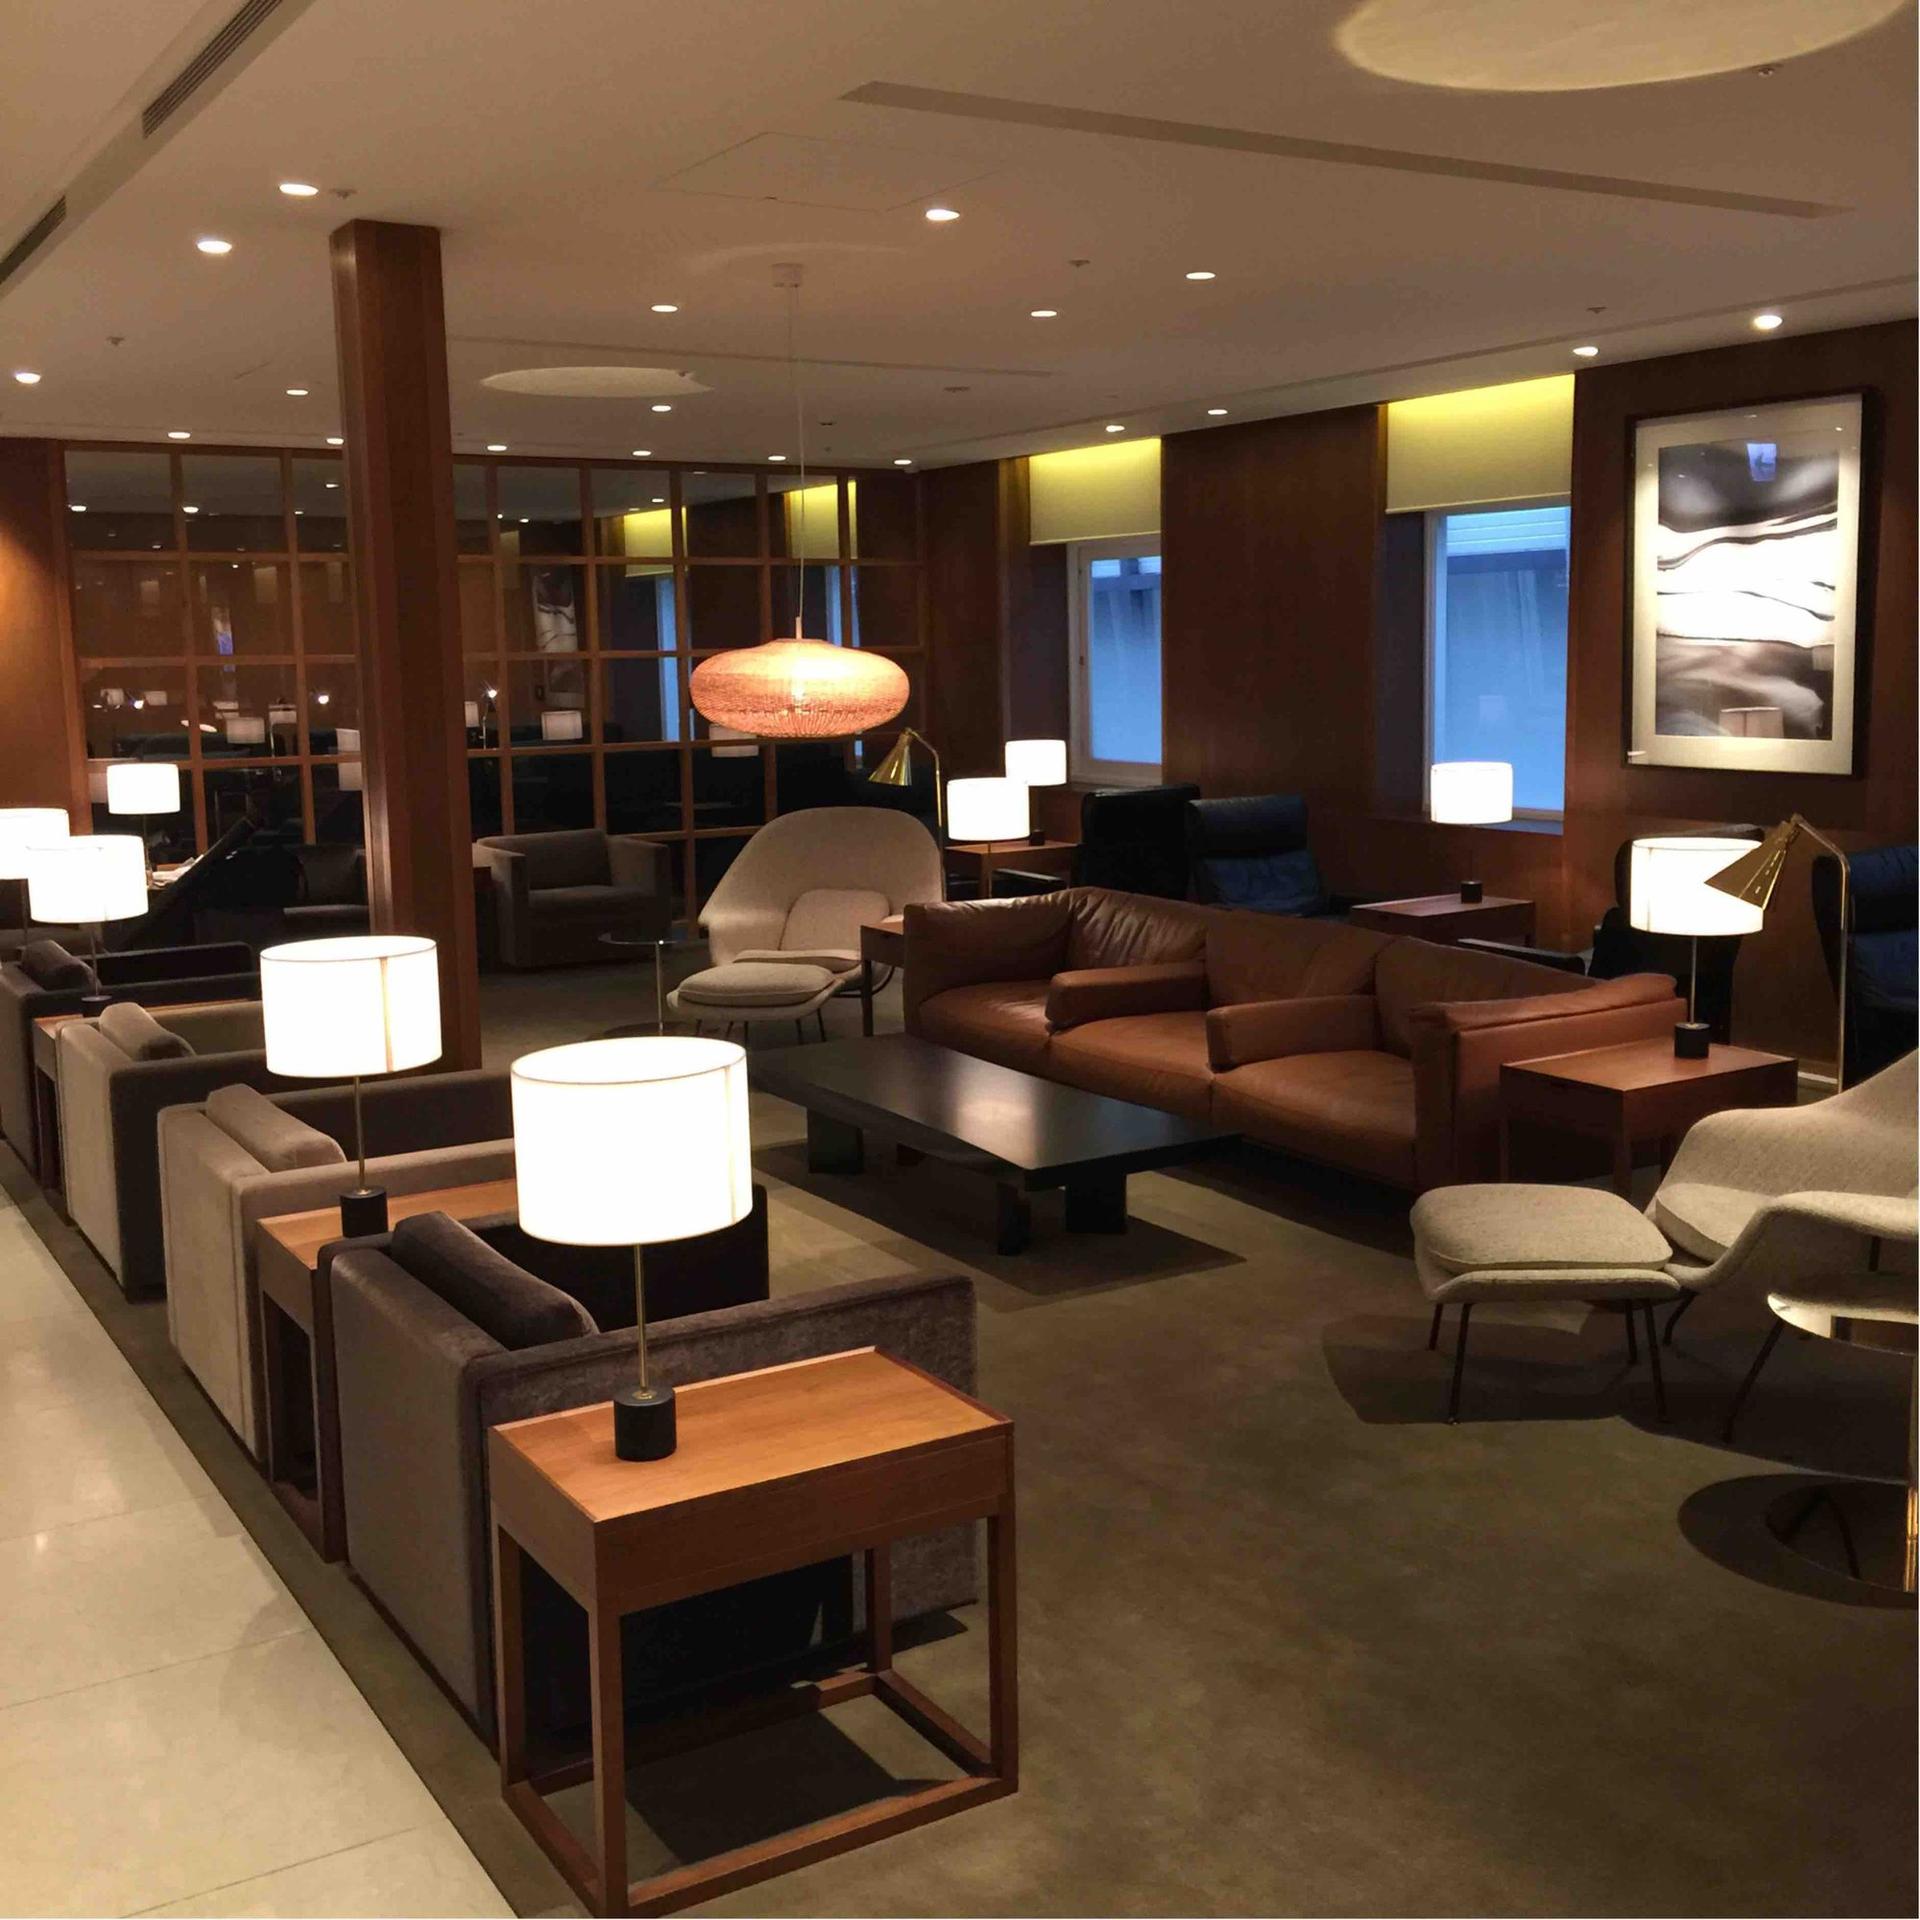 Cathay Pacific Lounge image 25 of 37